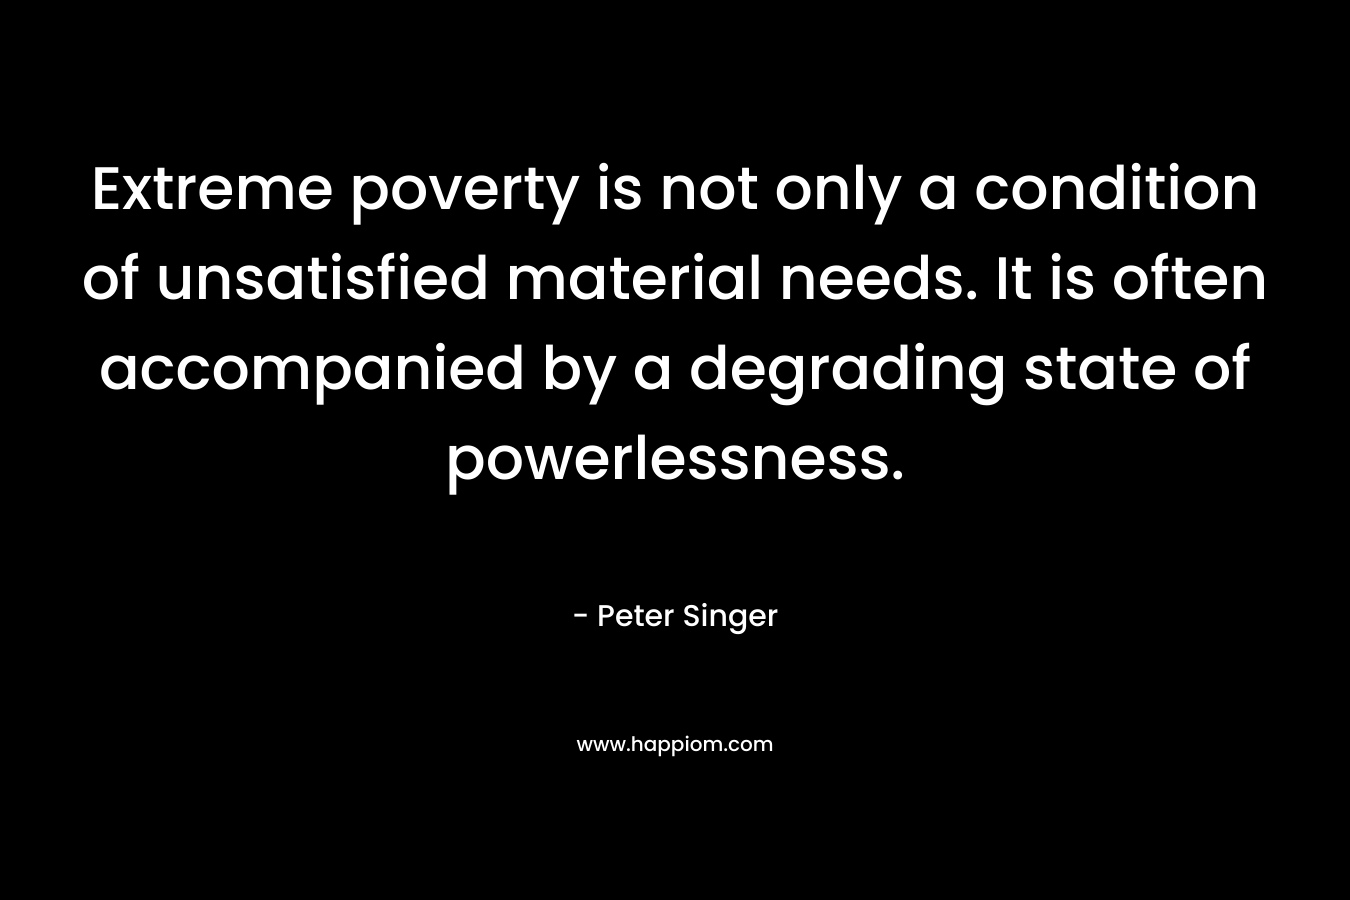 Extreme poverty is not only a condition of unsatisfied material needs. It is often accompanied by a degrading state of powerlessness.  – Peter Singer